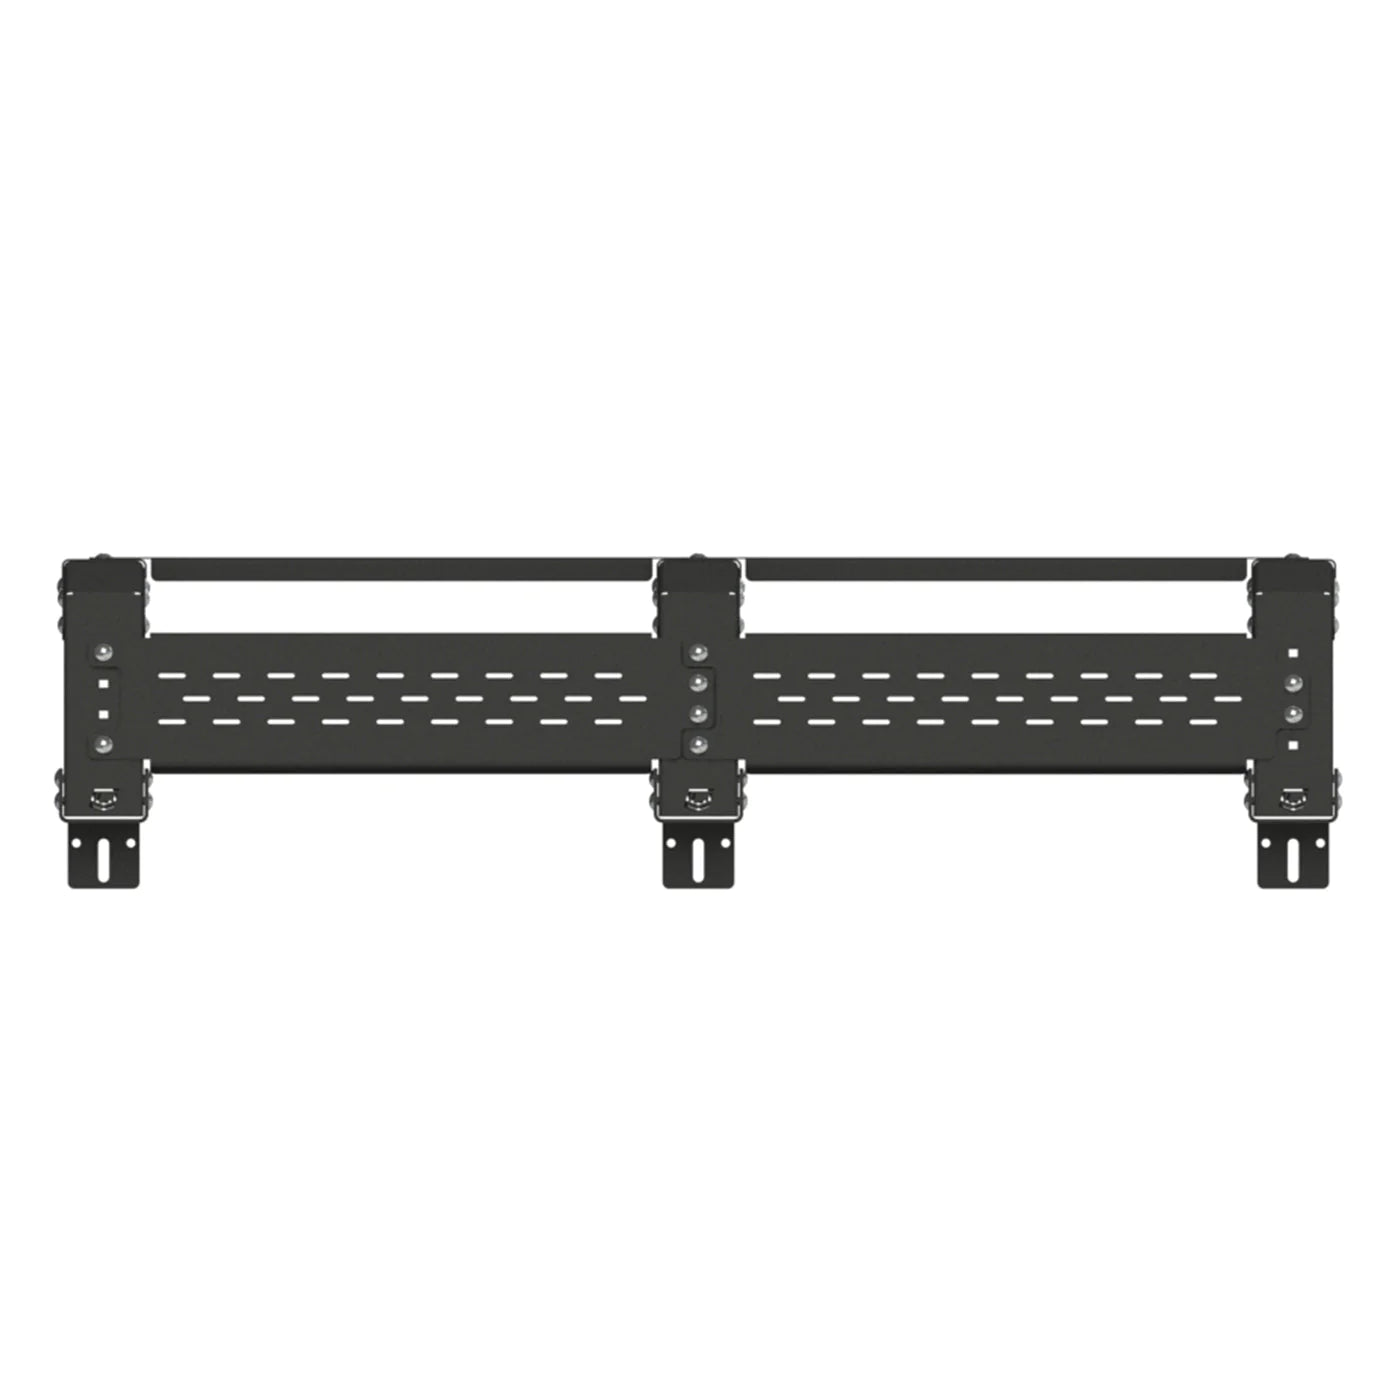 12" UNIVERSAL THORAX OVERLAND BED RACK SYSTEM (ANY TRUCK)